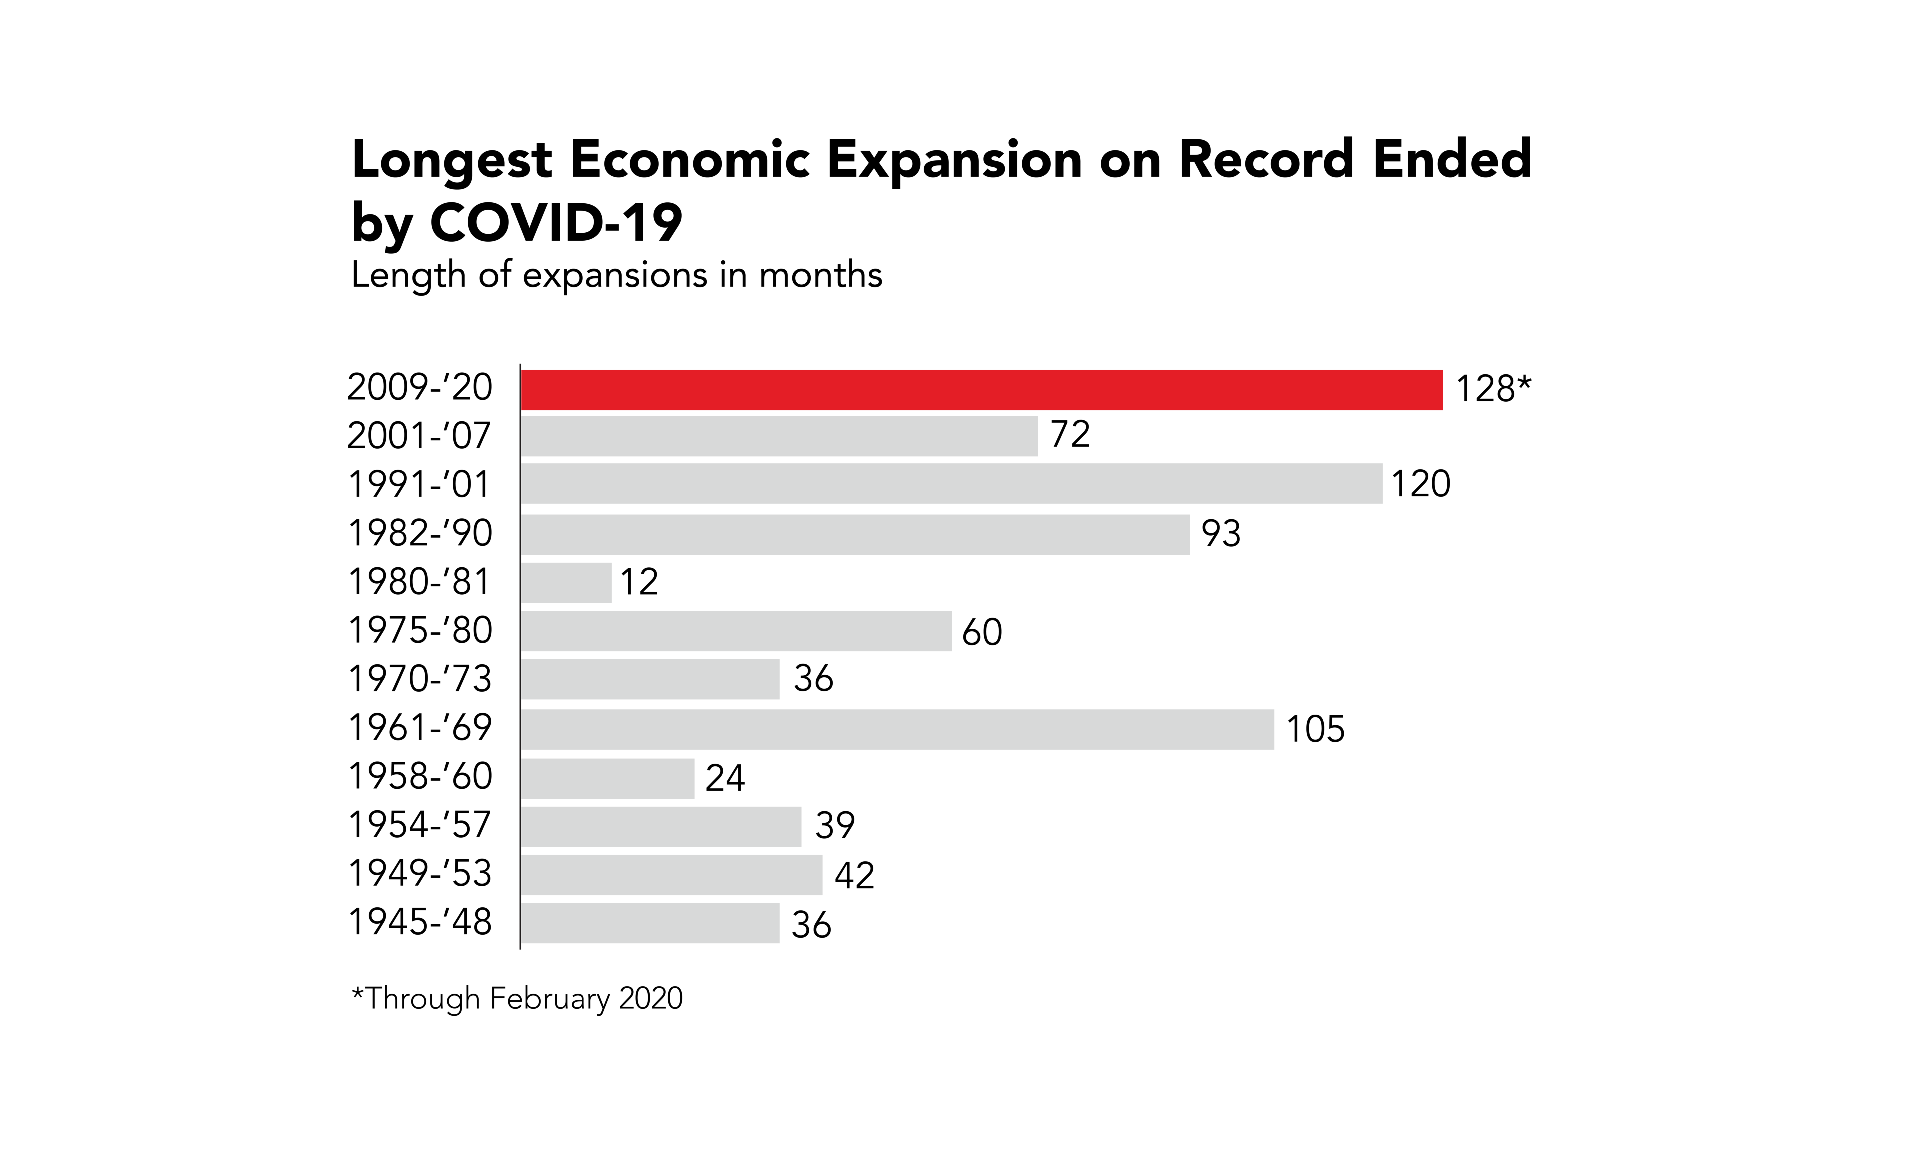 Longest Economic Expansion on Record Ended by COVID-19